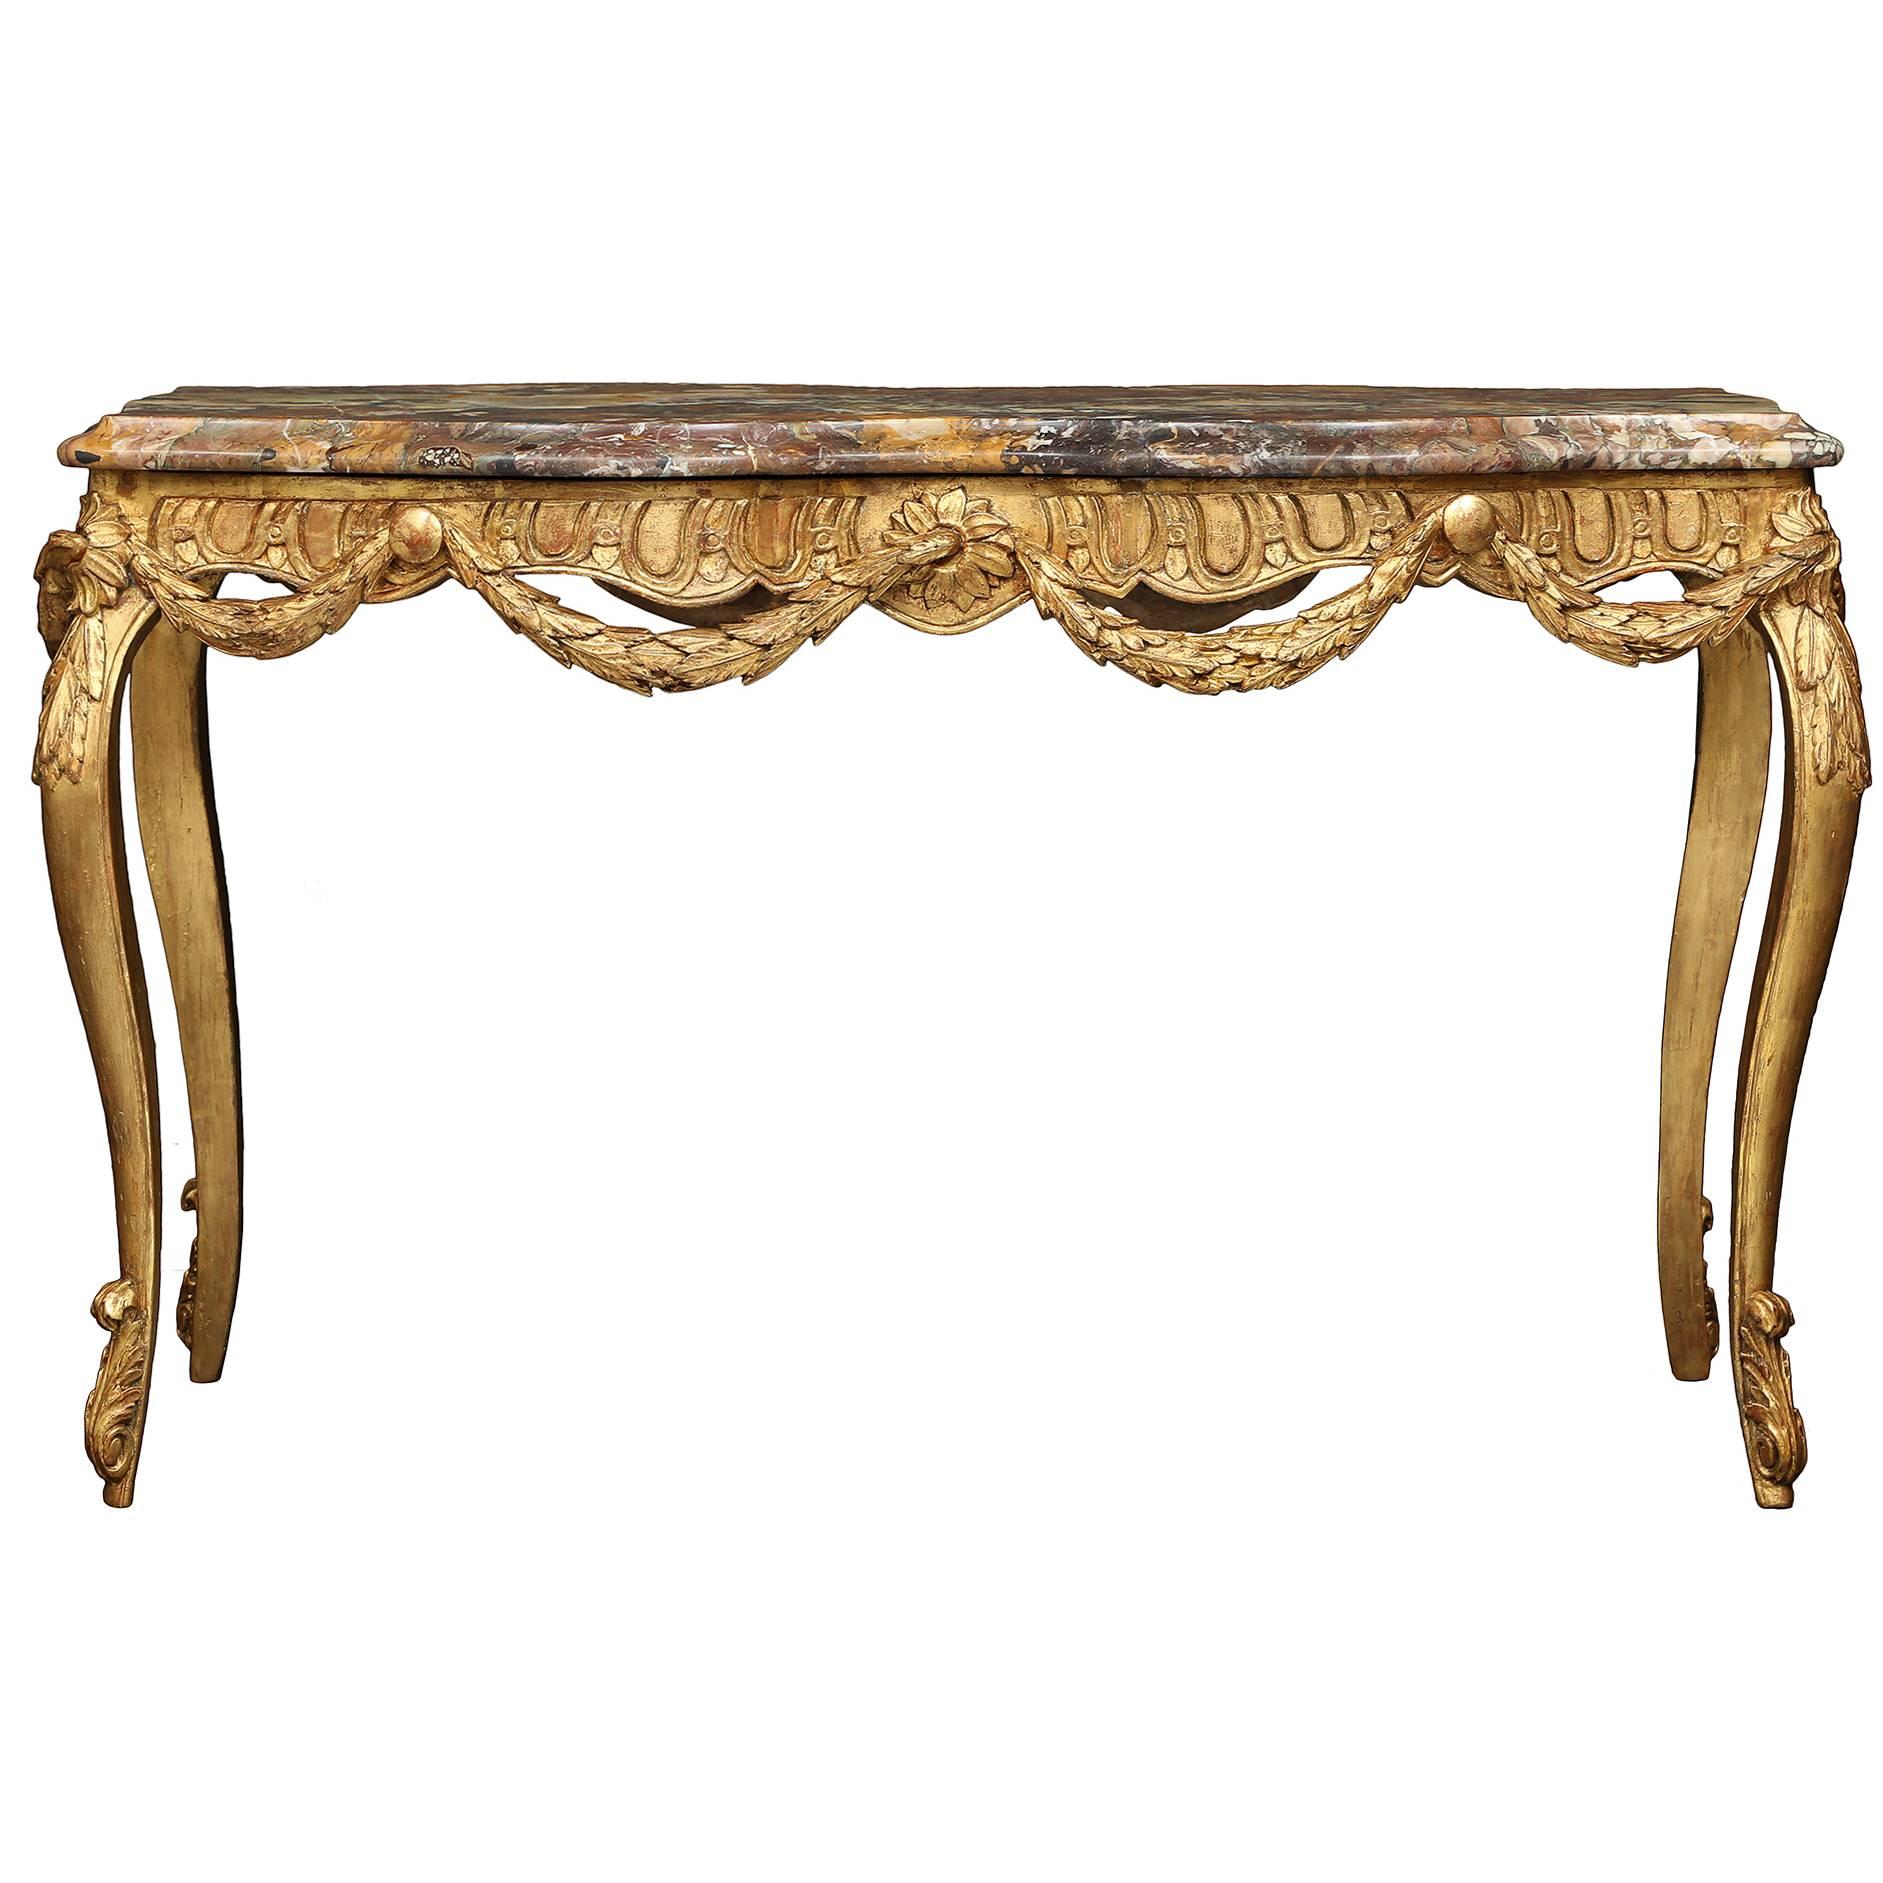 Italian 18th Century Louis XV Period Giltwood and Marble Center Table